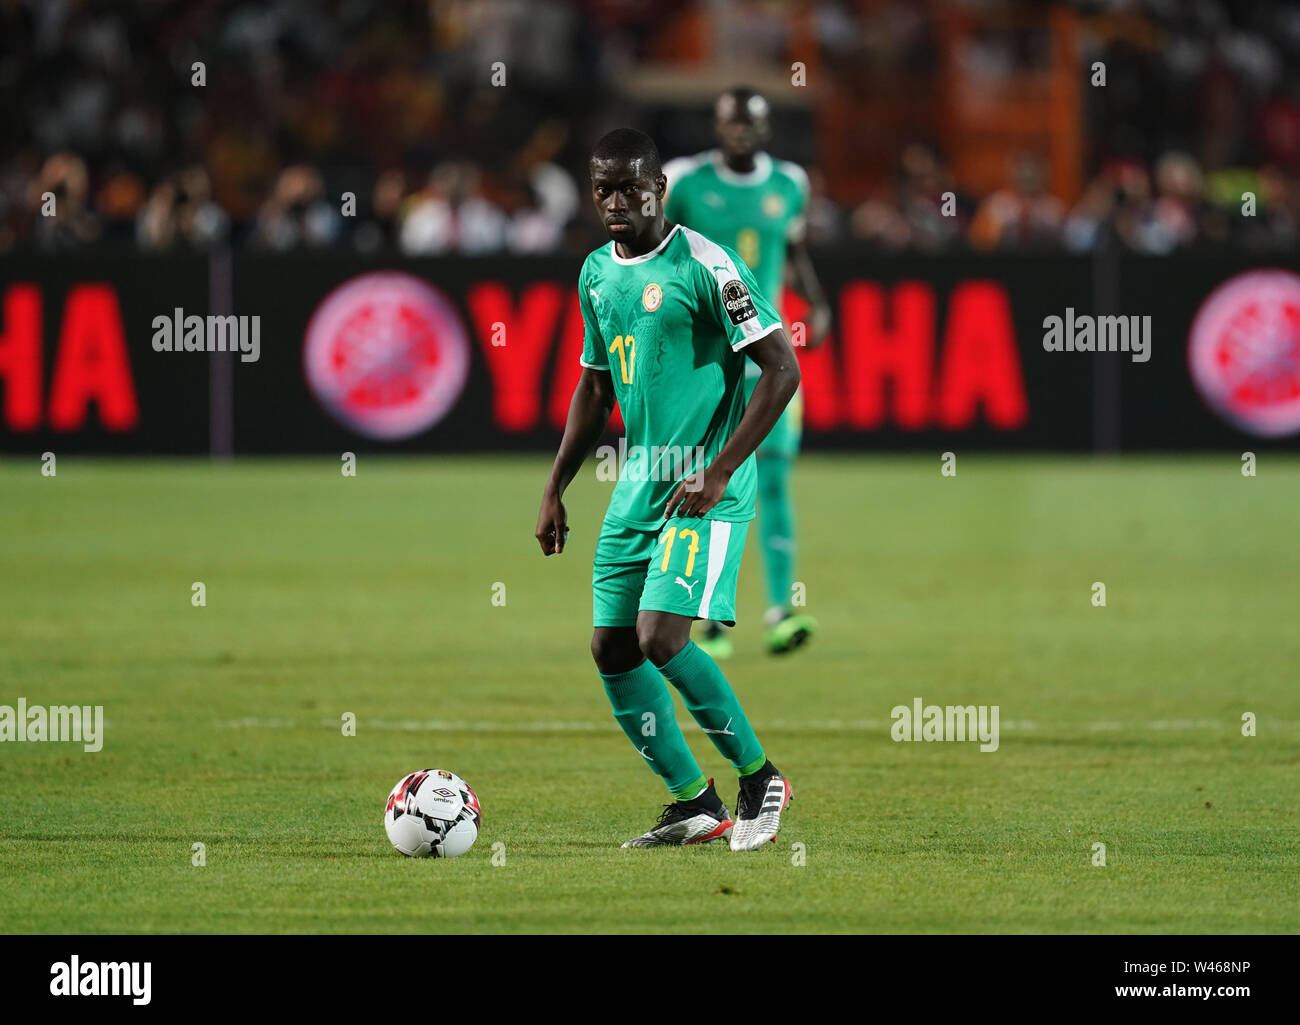 Cairo, Algeria, Egypt. 19th July, 2019. FRANCE OUT July 19, 2019: Papa Alioune Ndiaye of Senegal during the Final of 2019 African Cup of Nations match between Algeria and Senegal at the Cairo International Stadium in Cairo, Egypt. Ulrik Pedersen/CSM/Alamy Live News Stock Photo